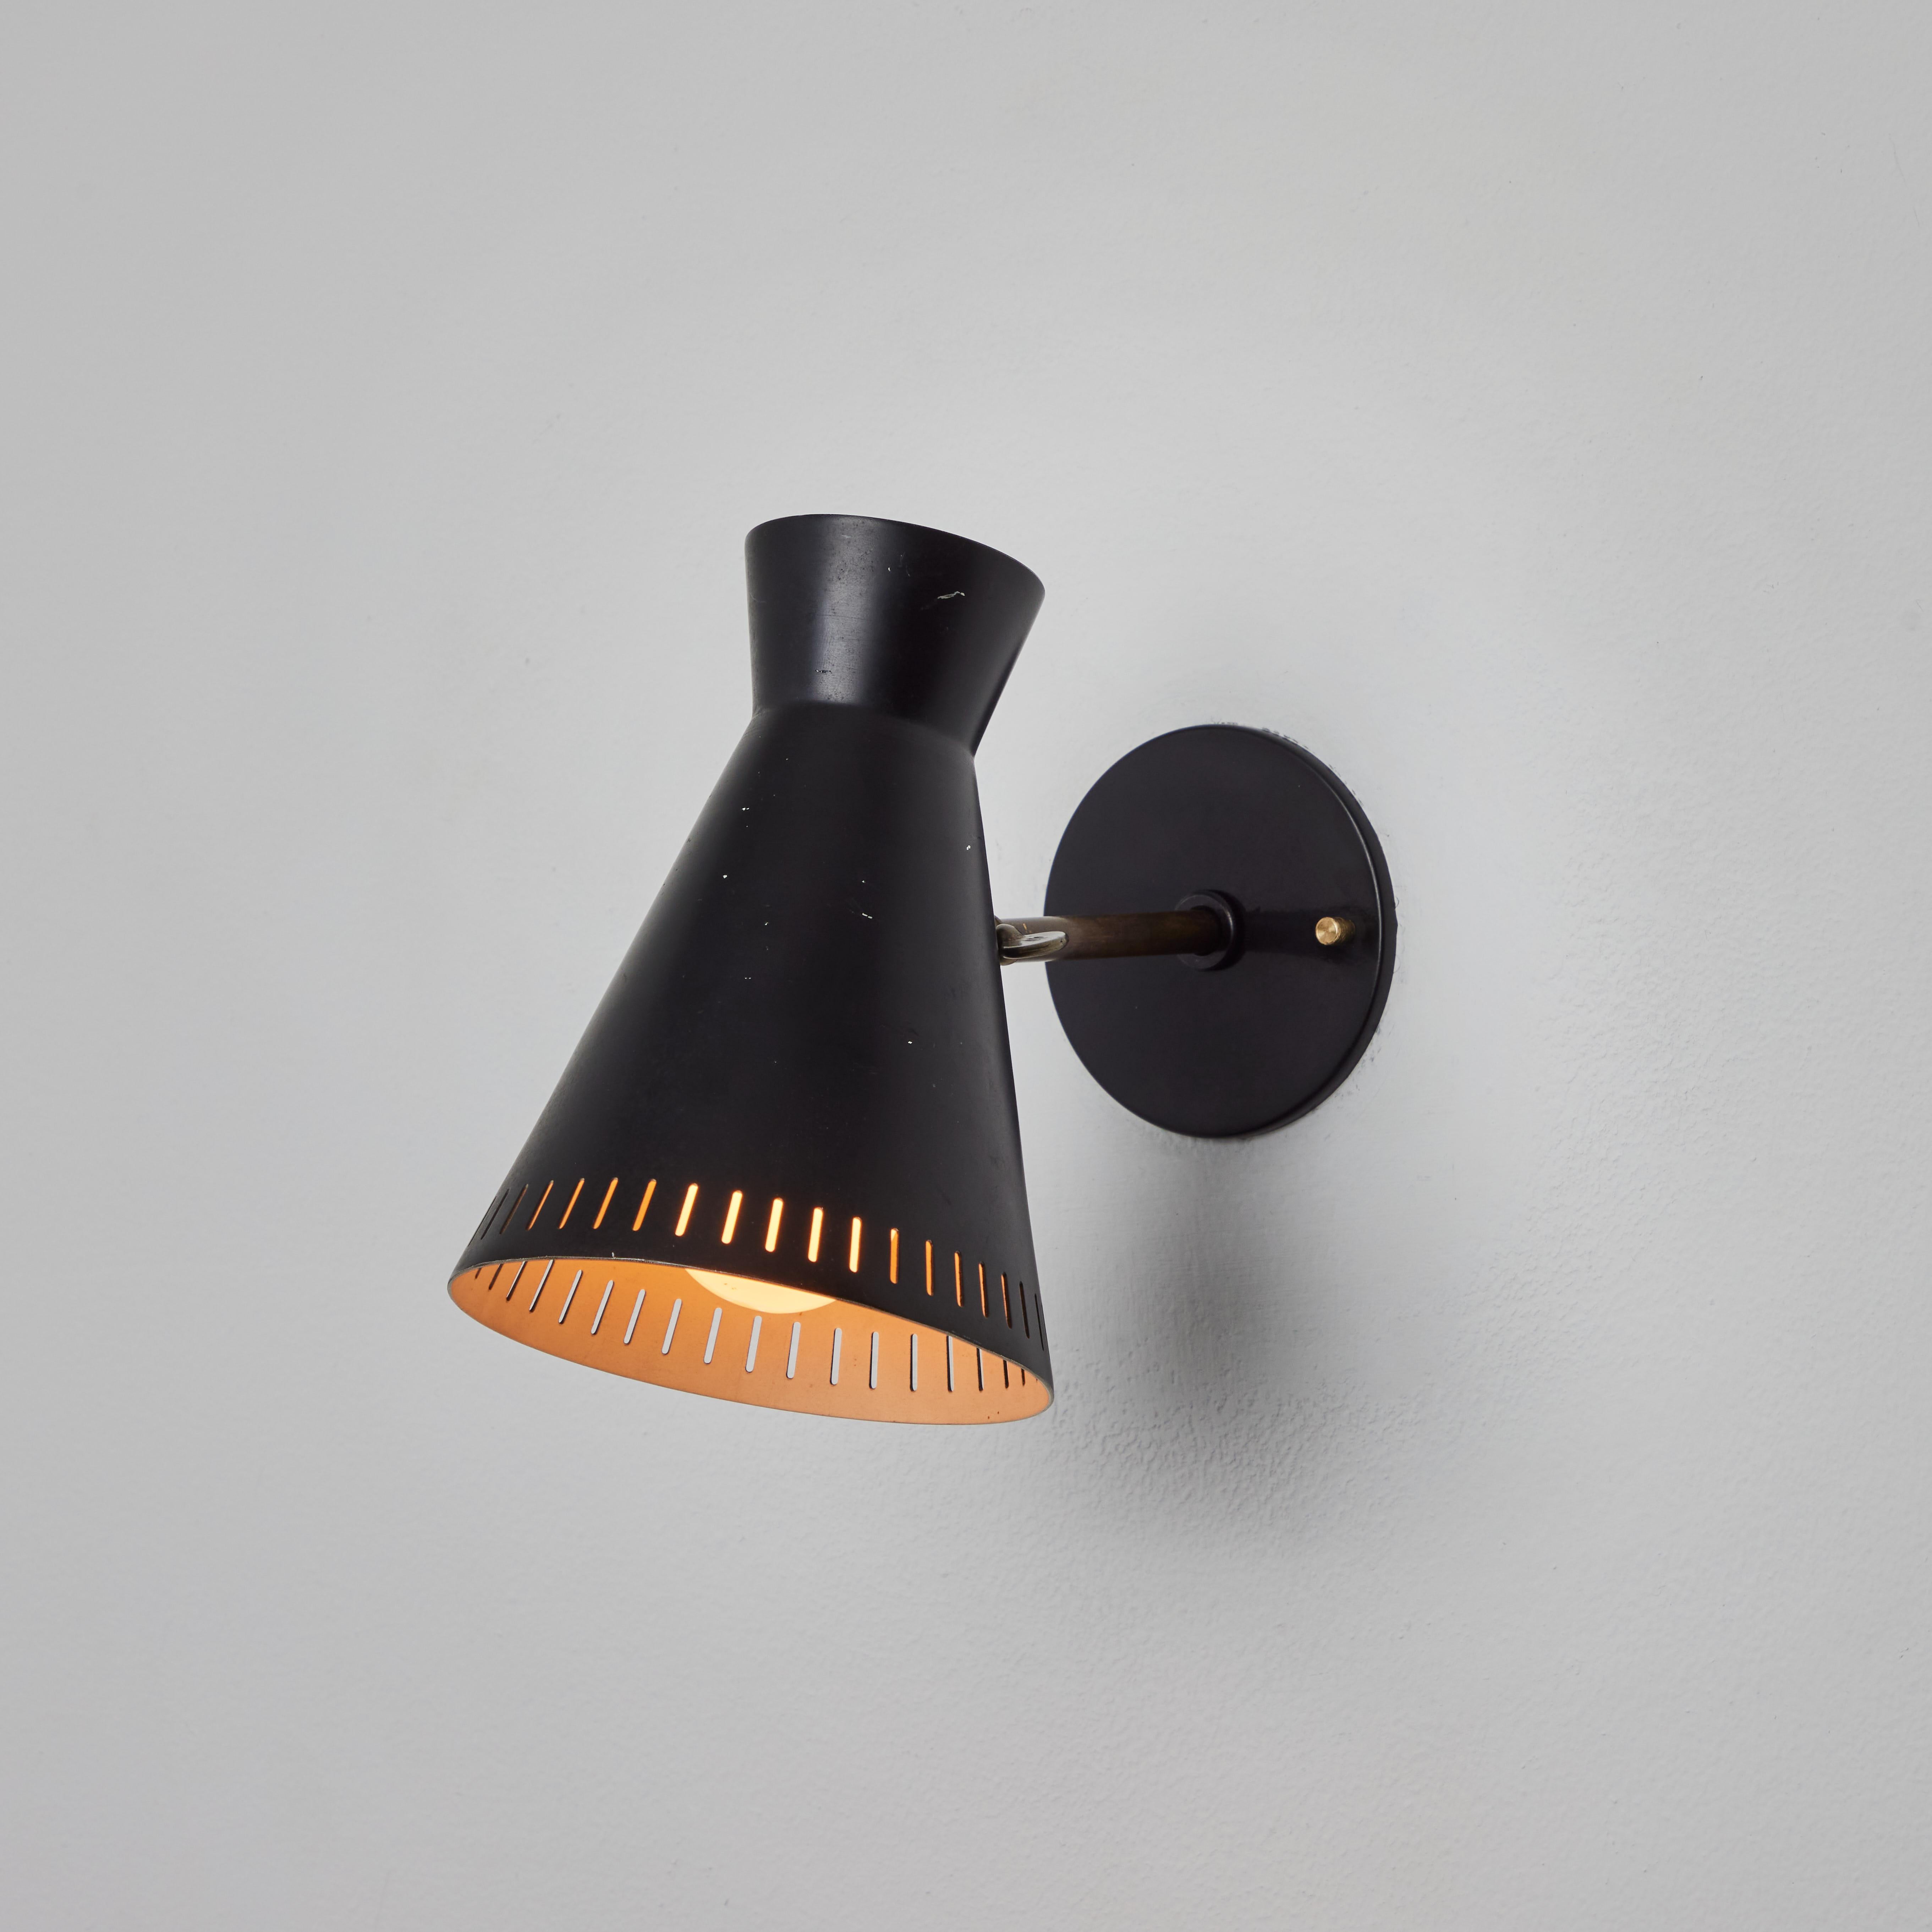 Painted 1950s Perforated Black Metal Diabolo Wall Lamp Attributed to Mauri Almari For Sale